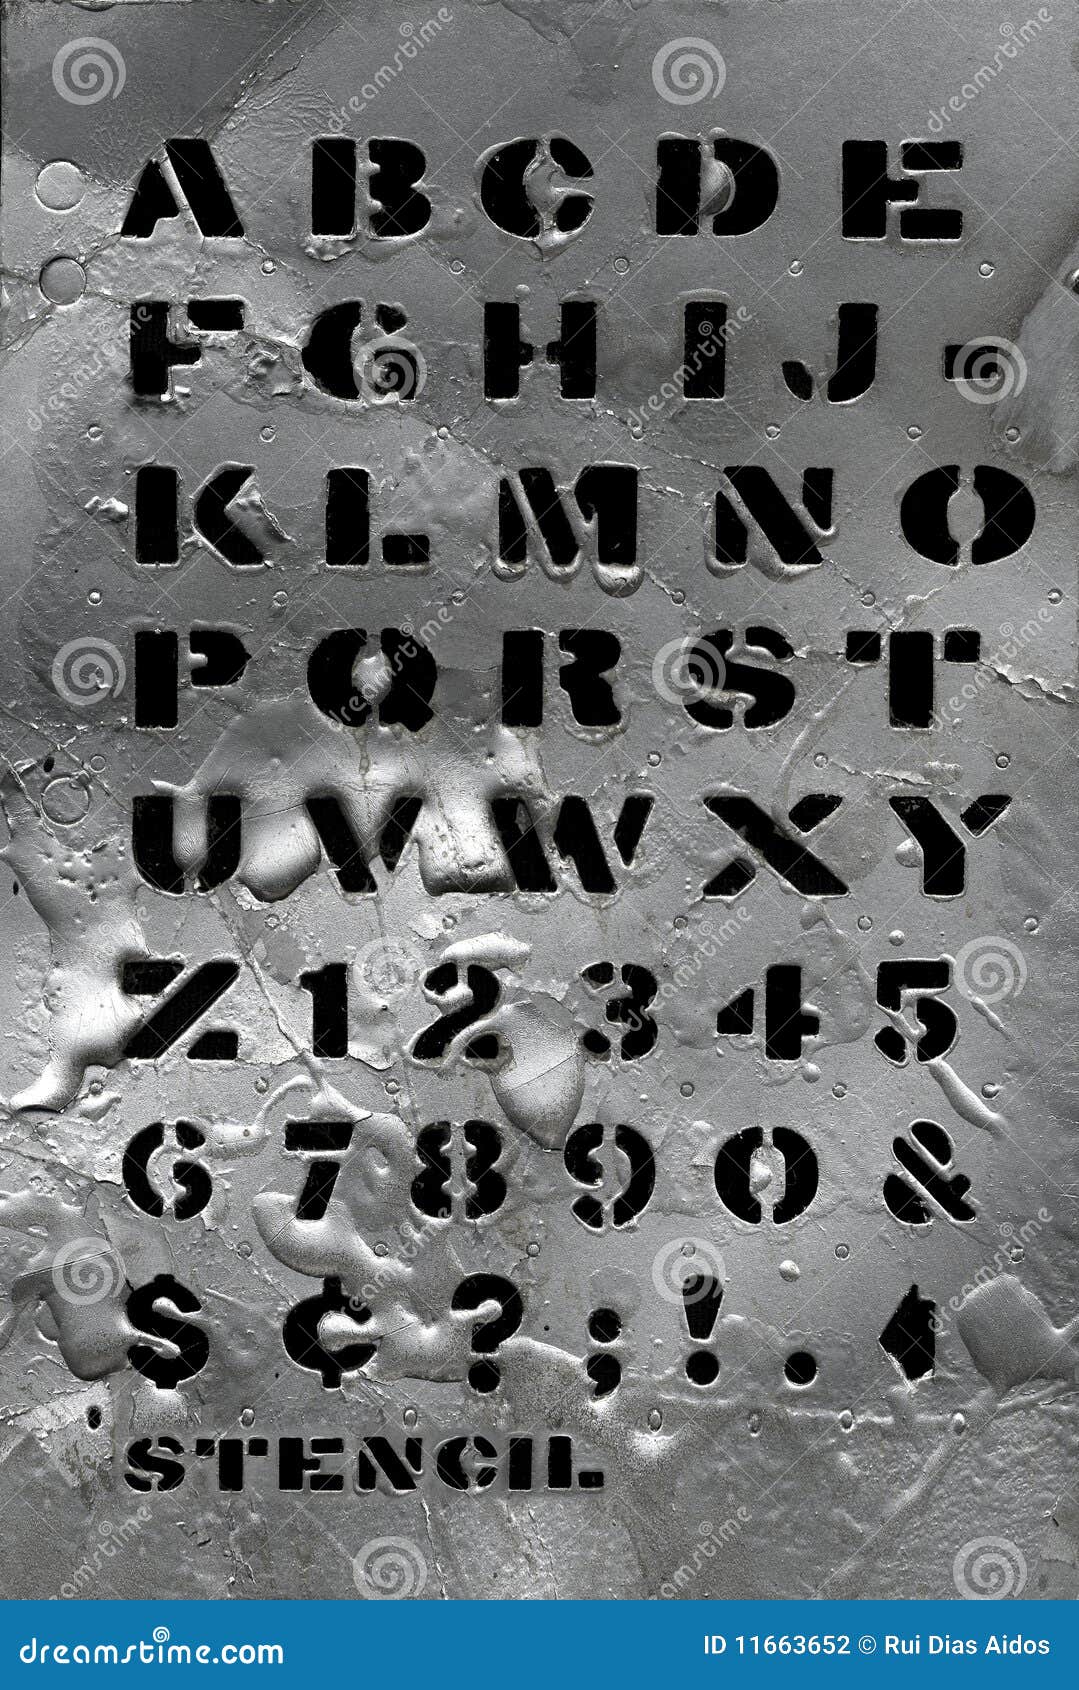 Metal stencil stock photo. Image of message, word, wall - 11663652